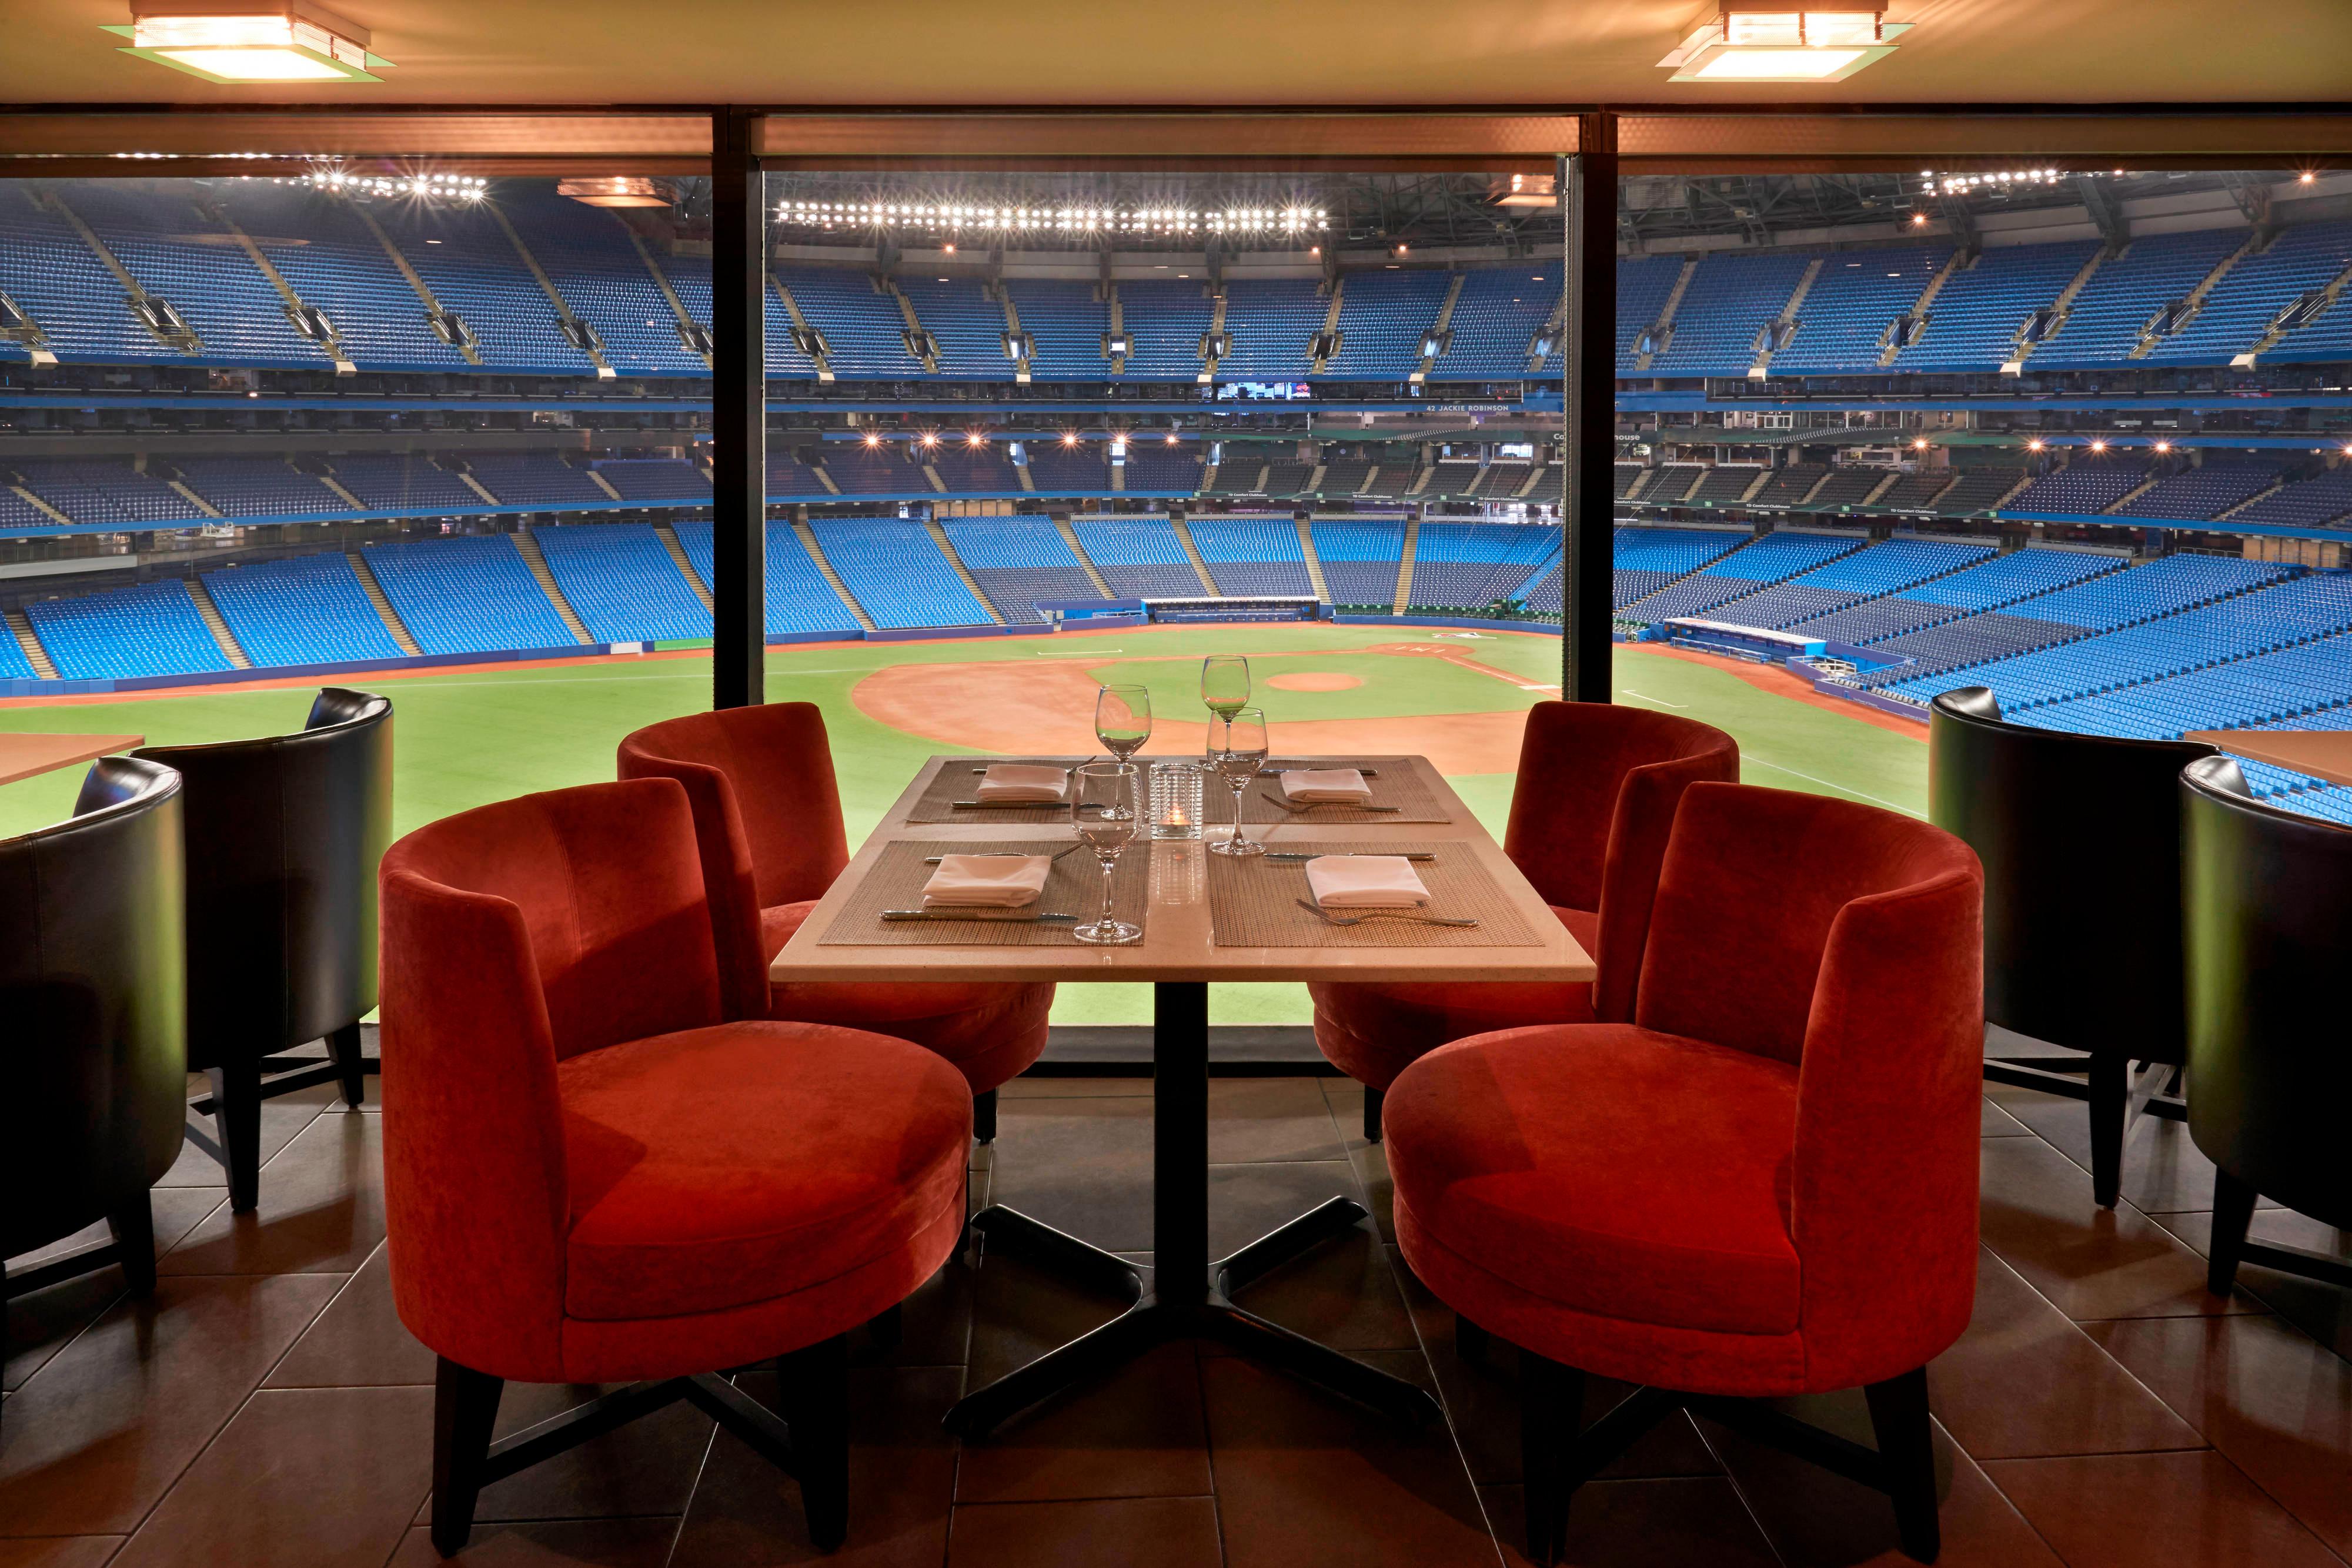 Sportsnet Grill with views of the field